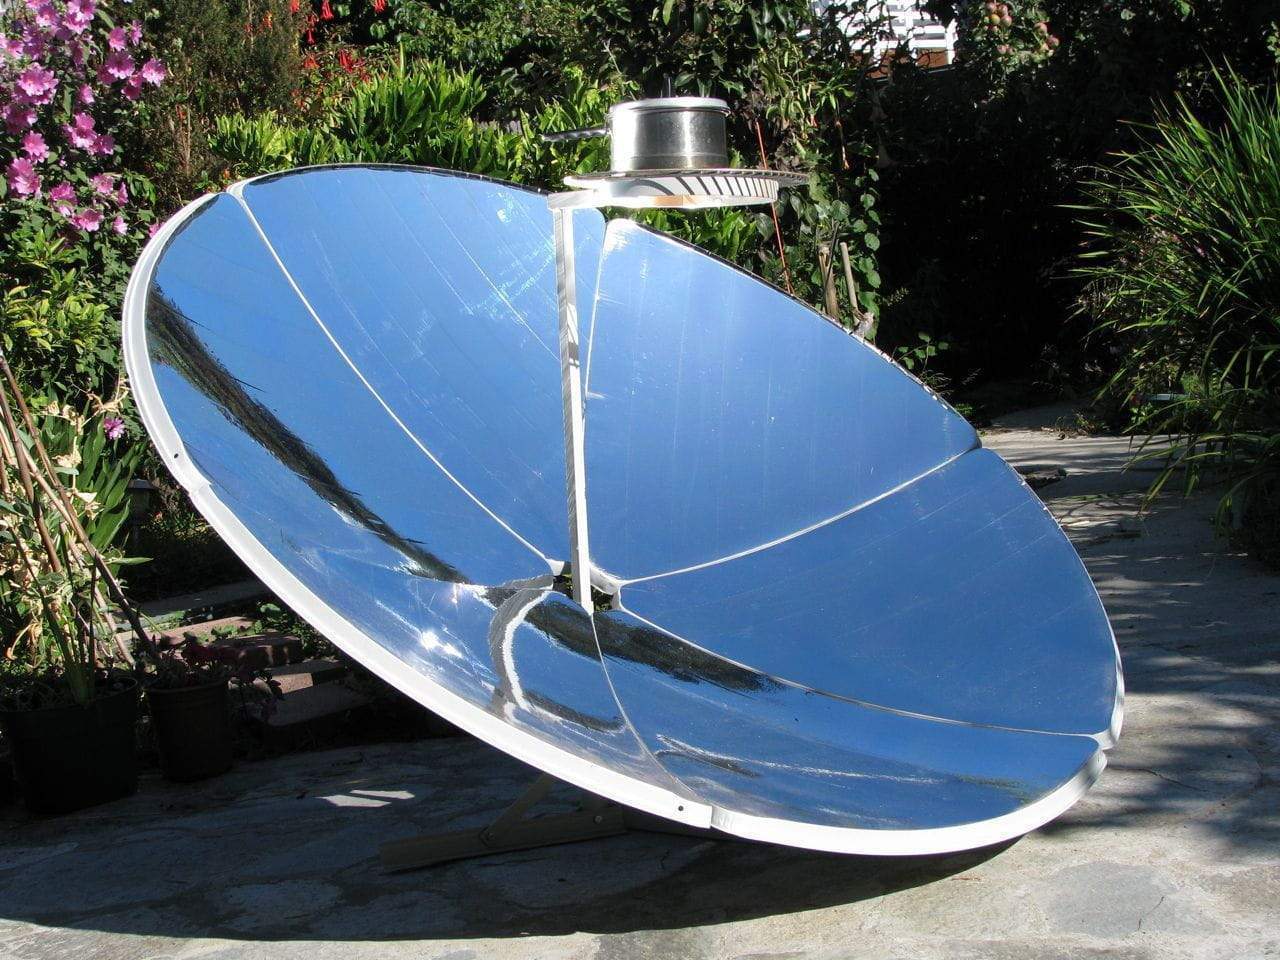 16-great-facts-about-solar-ovens